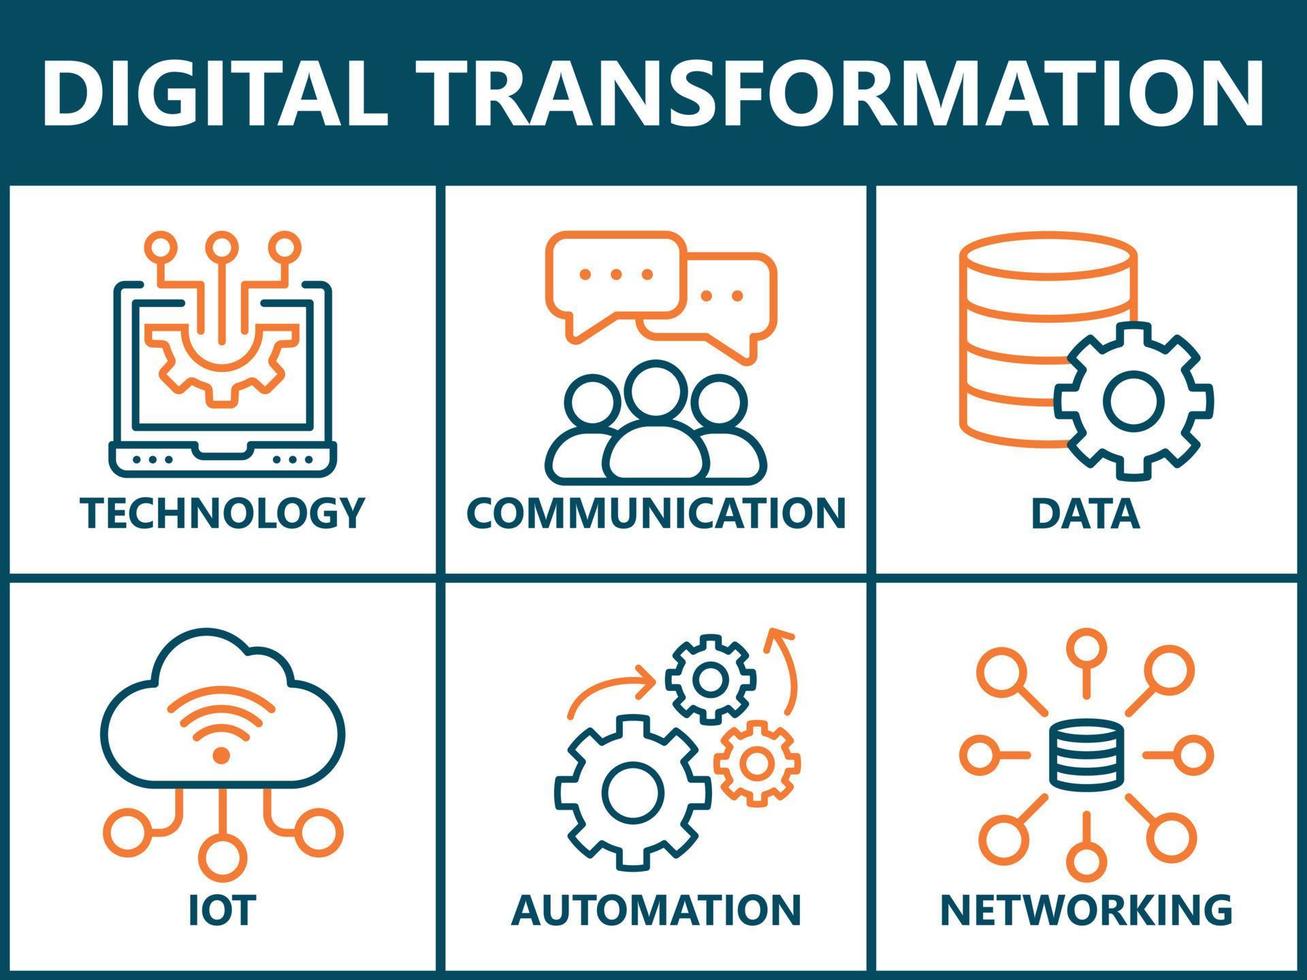 Digital transformation banner web icon vector illustration concept with icon of technology, communication, data, iot, ict, automation, internet, and networking